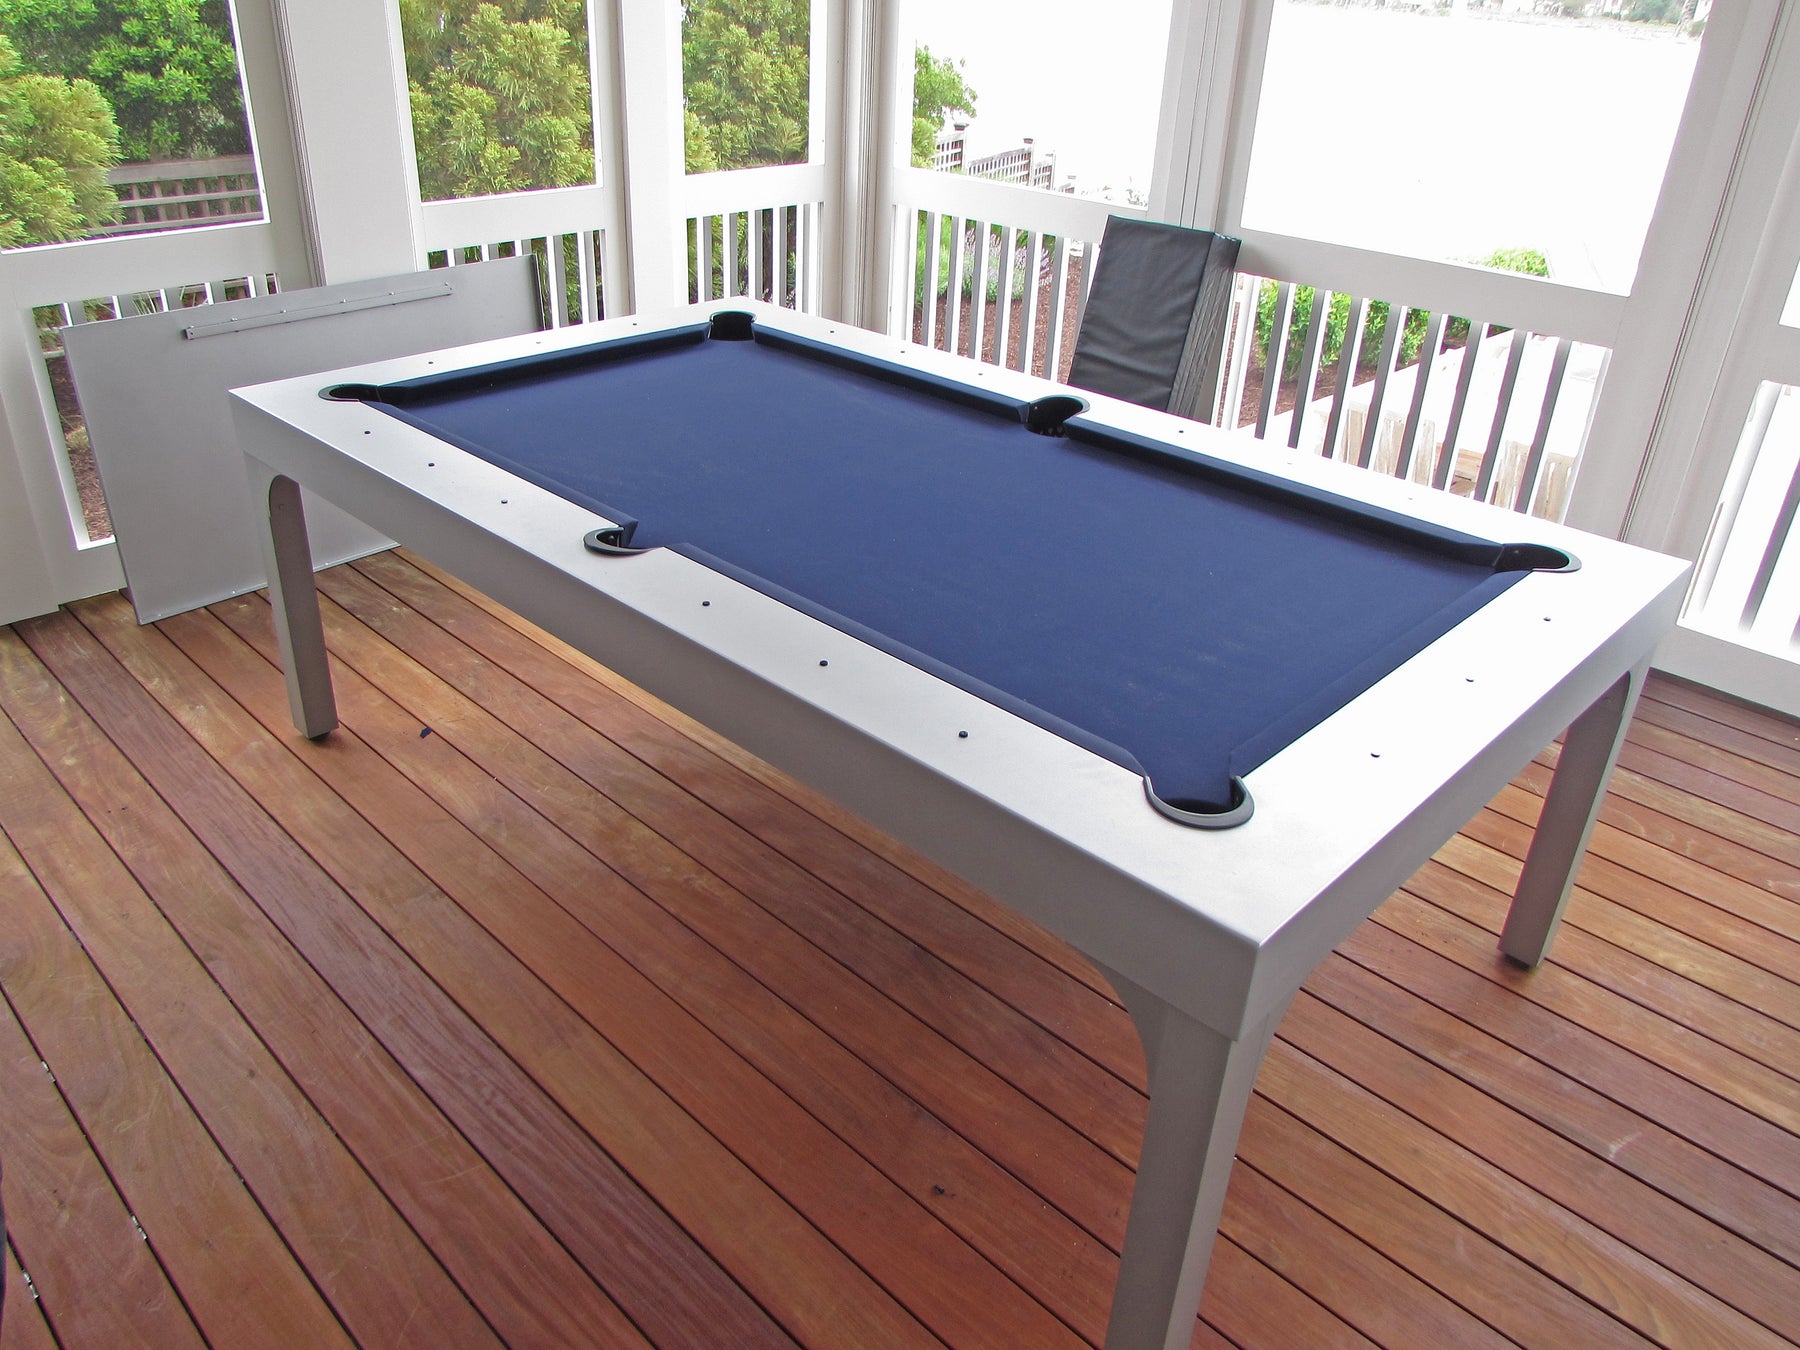 Outdoor Balcony Pool Table Installed in Washington DC